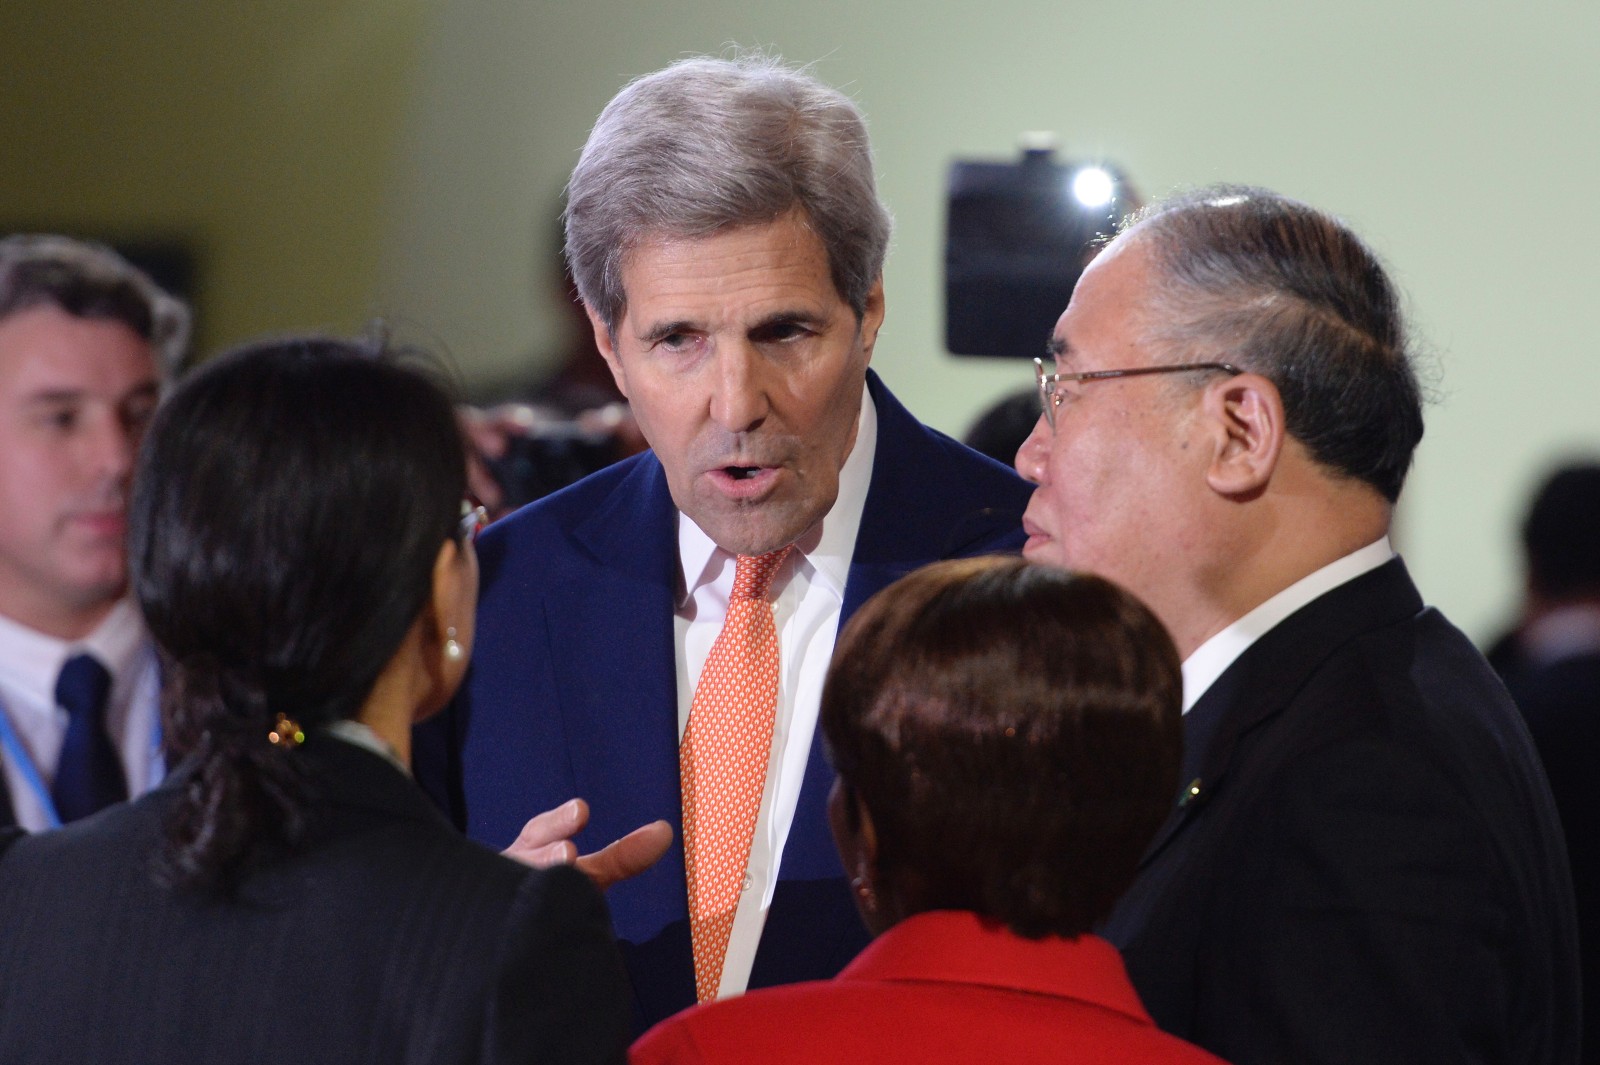 Former U.S. Secretary of State John Kerry speaks with delegates at COP21 in Le Bourget, north of Paris, on December 12, 2015.